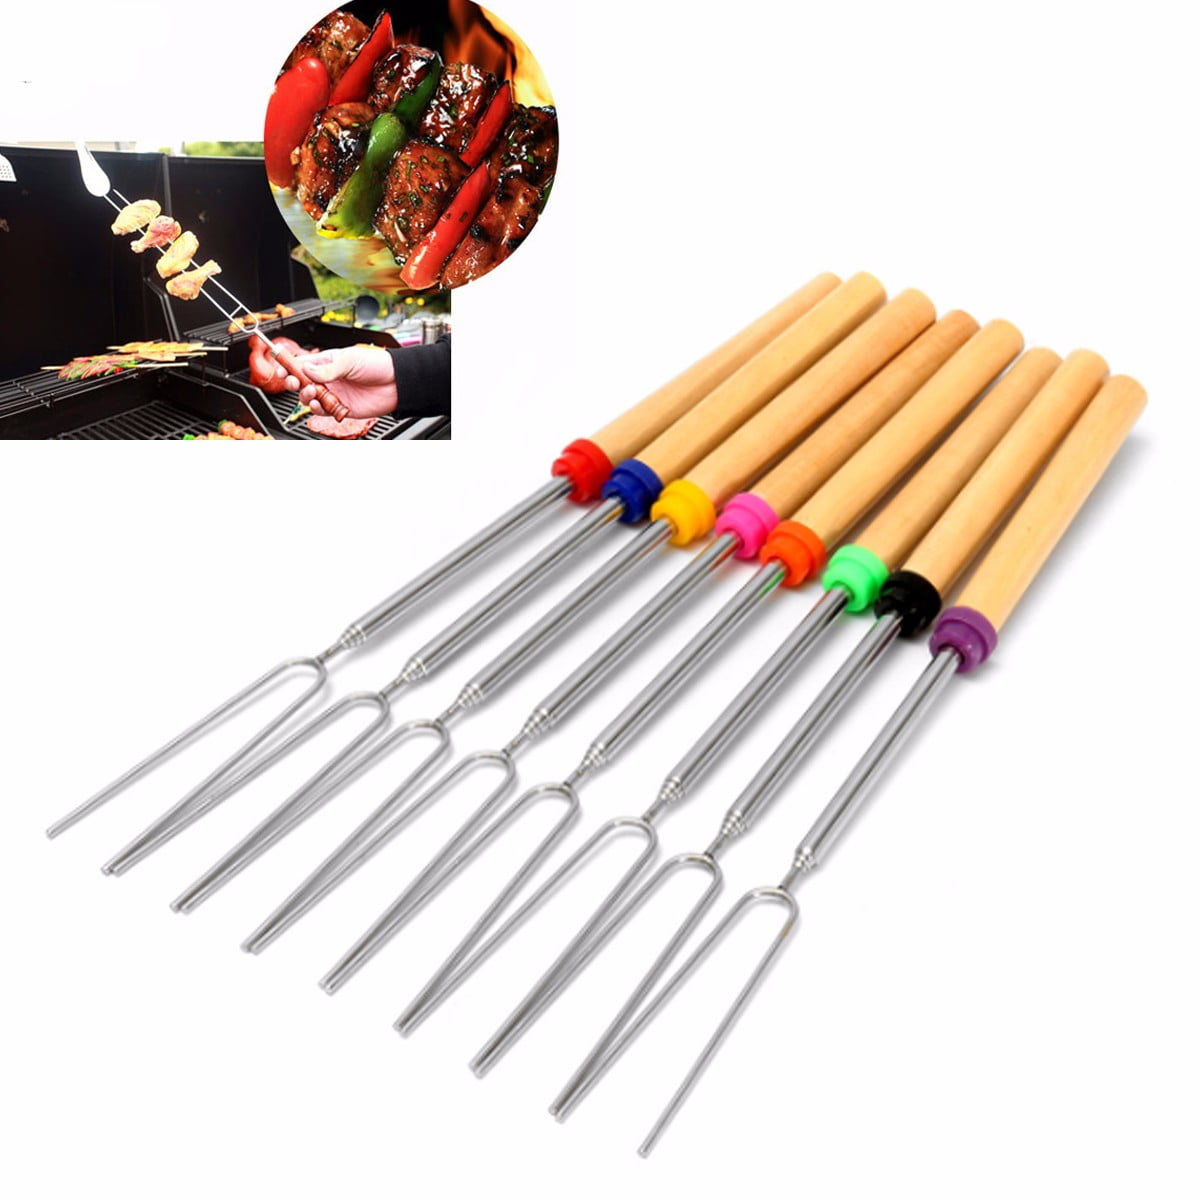 Barbecue Skewers Wood Handle Marshmallow Roasting Sticks Meat Hot Dog Fork 12pcs 